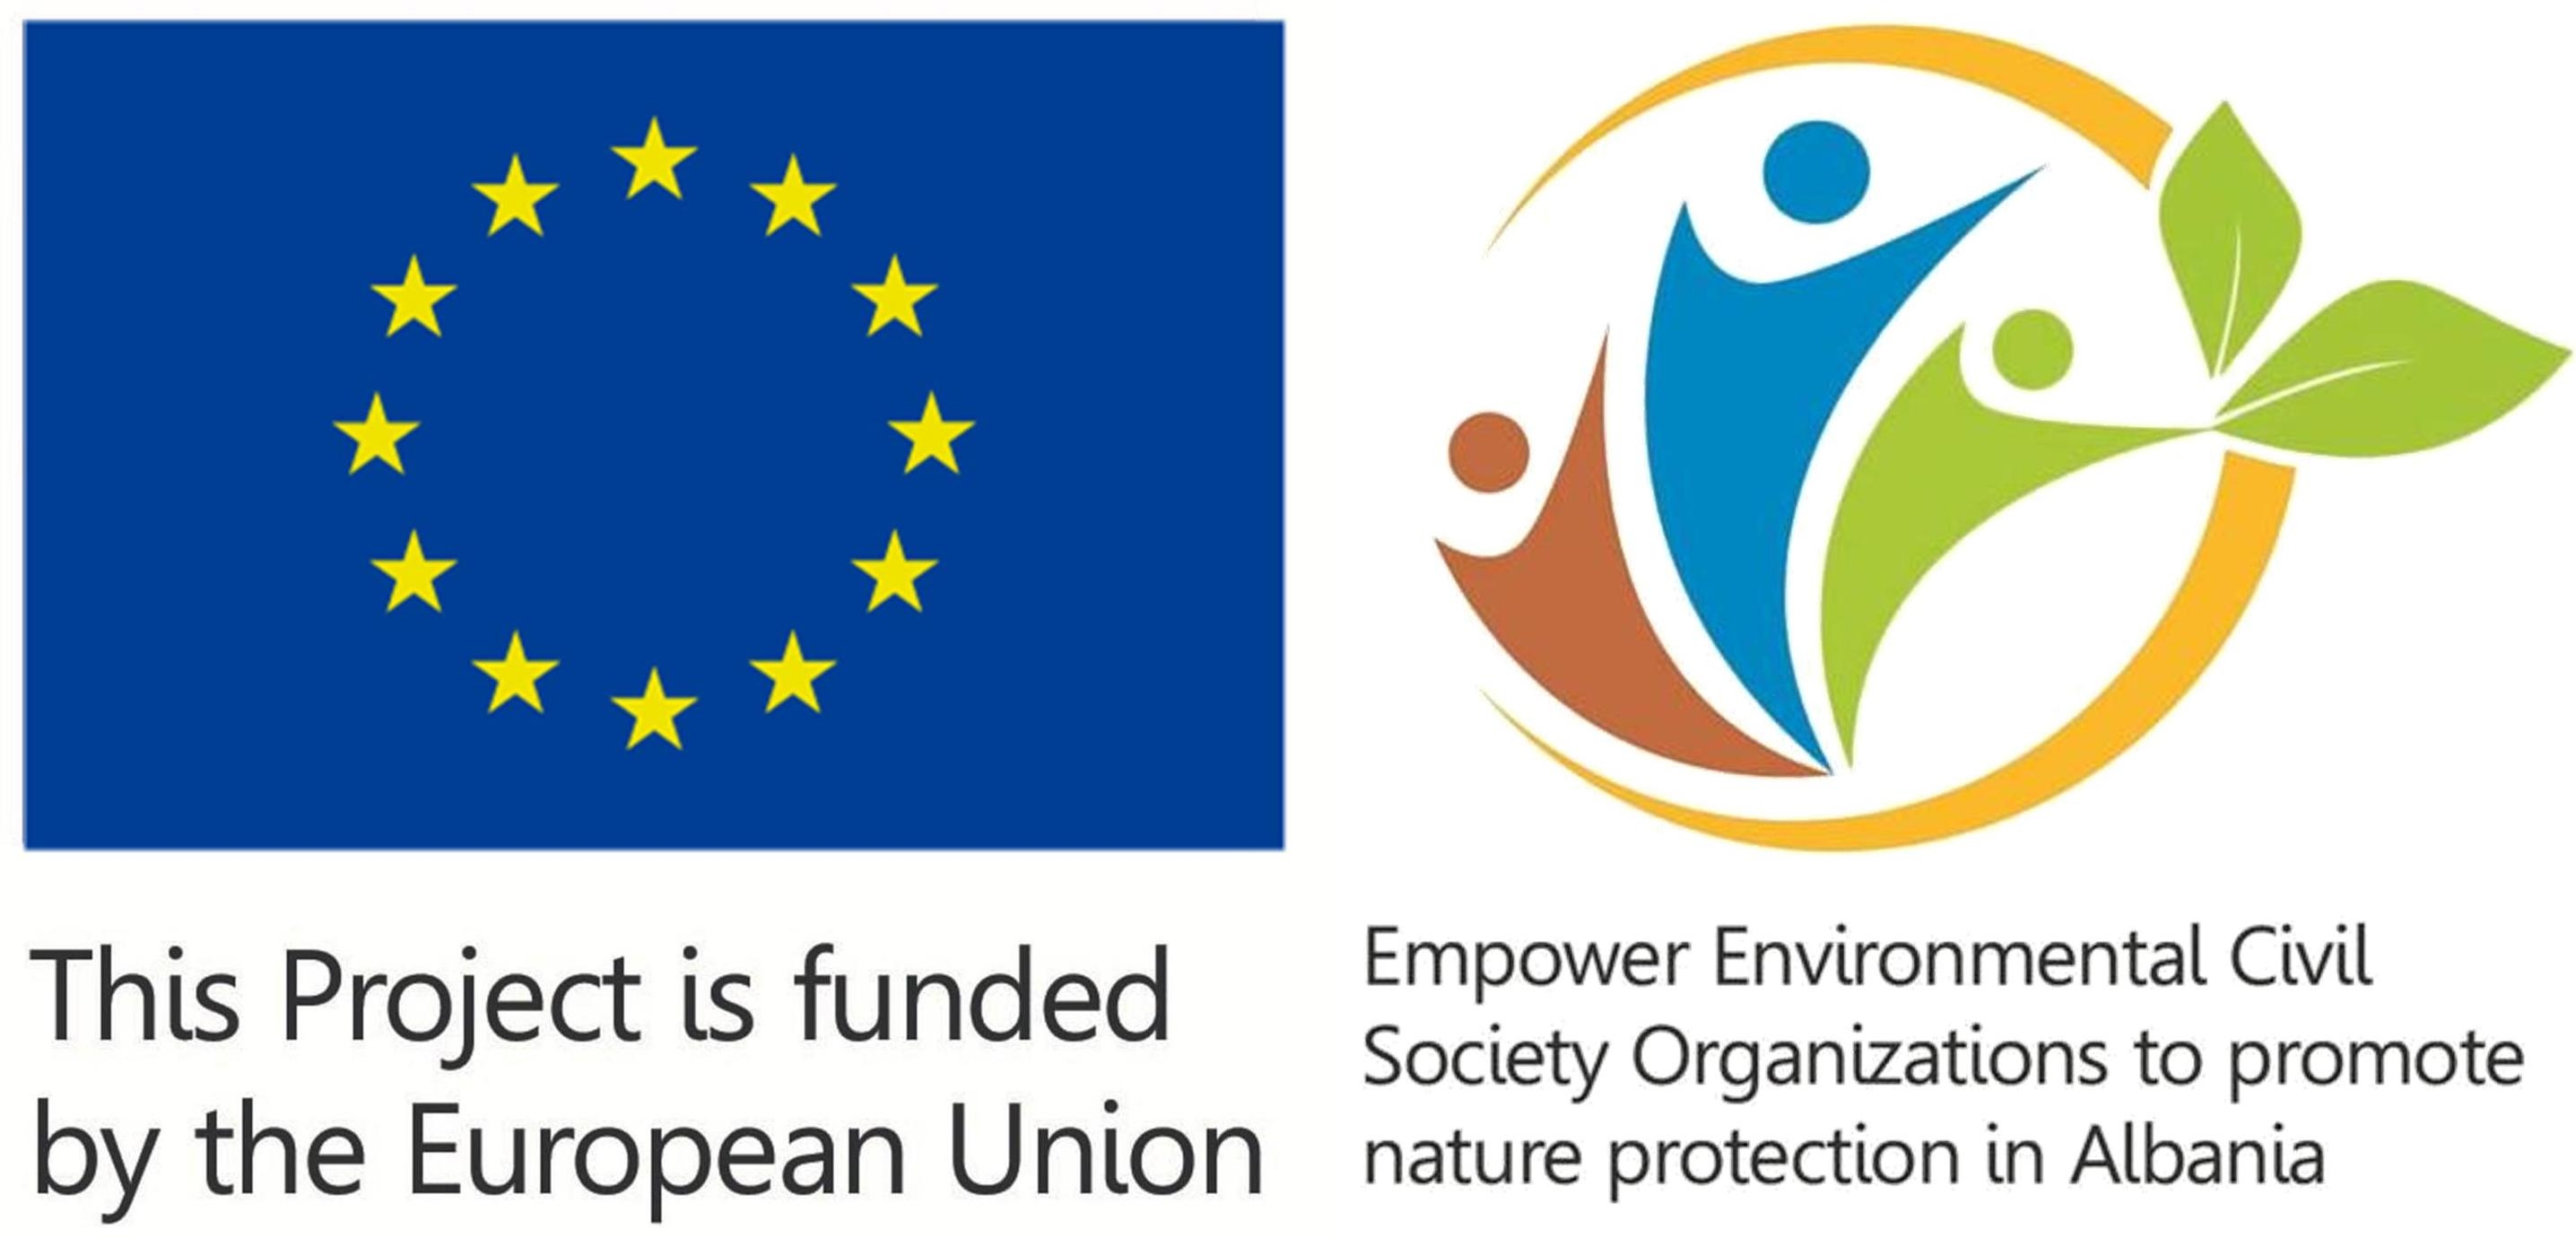 Empower Environmental Civil Society Organizations to promote nature protection in Albania